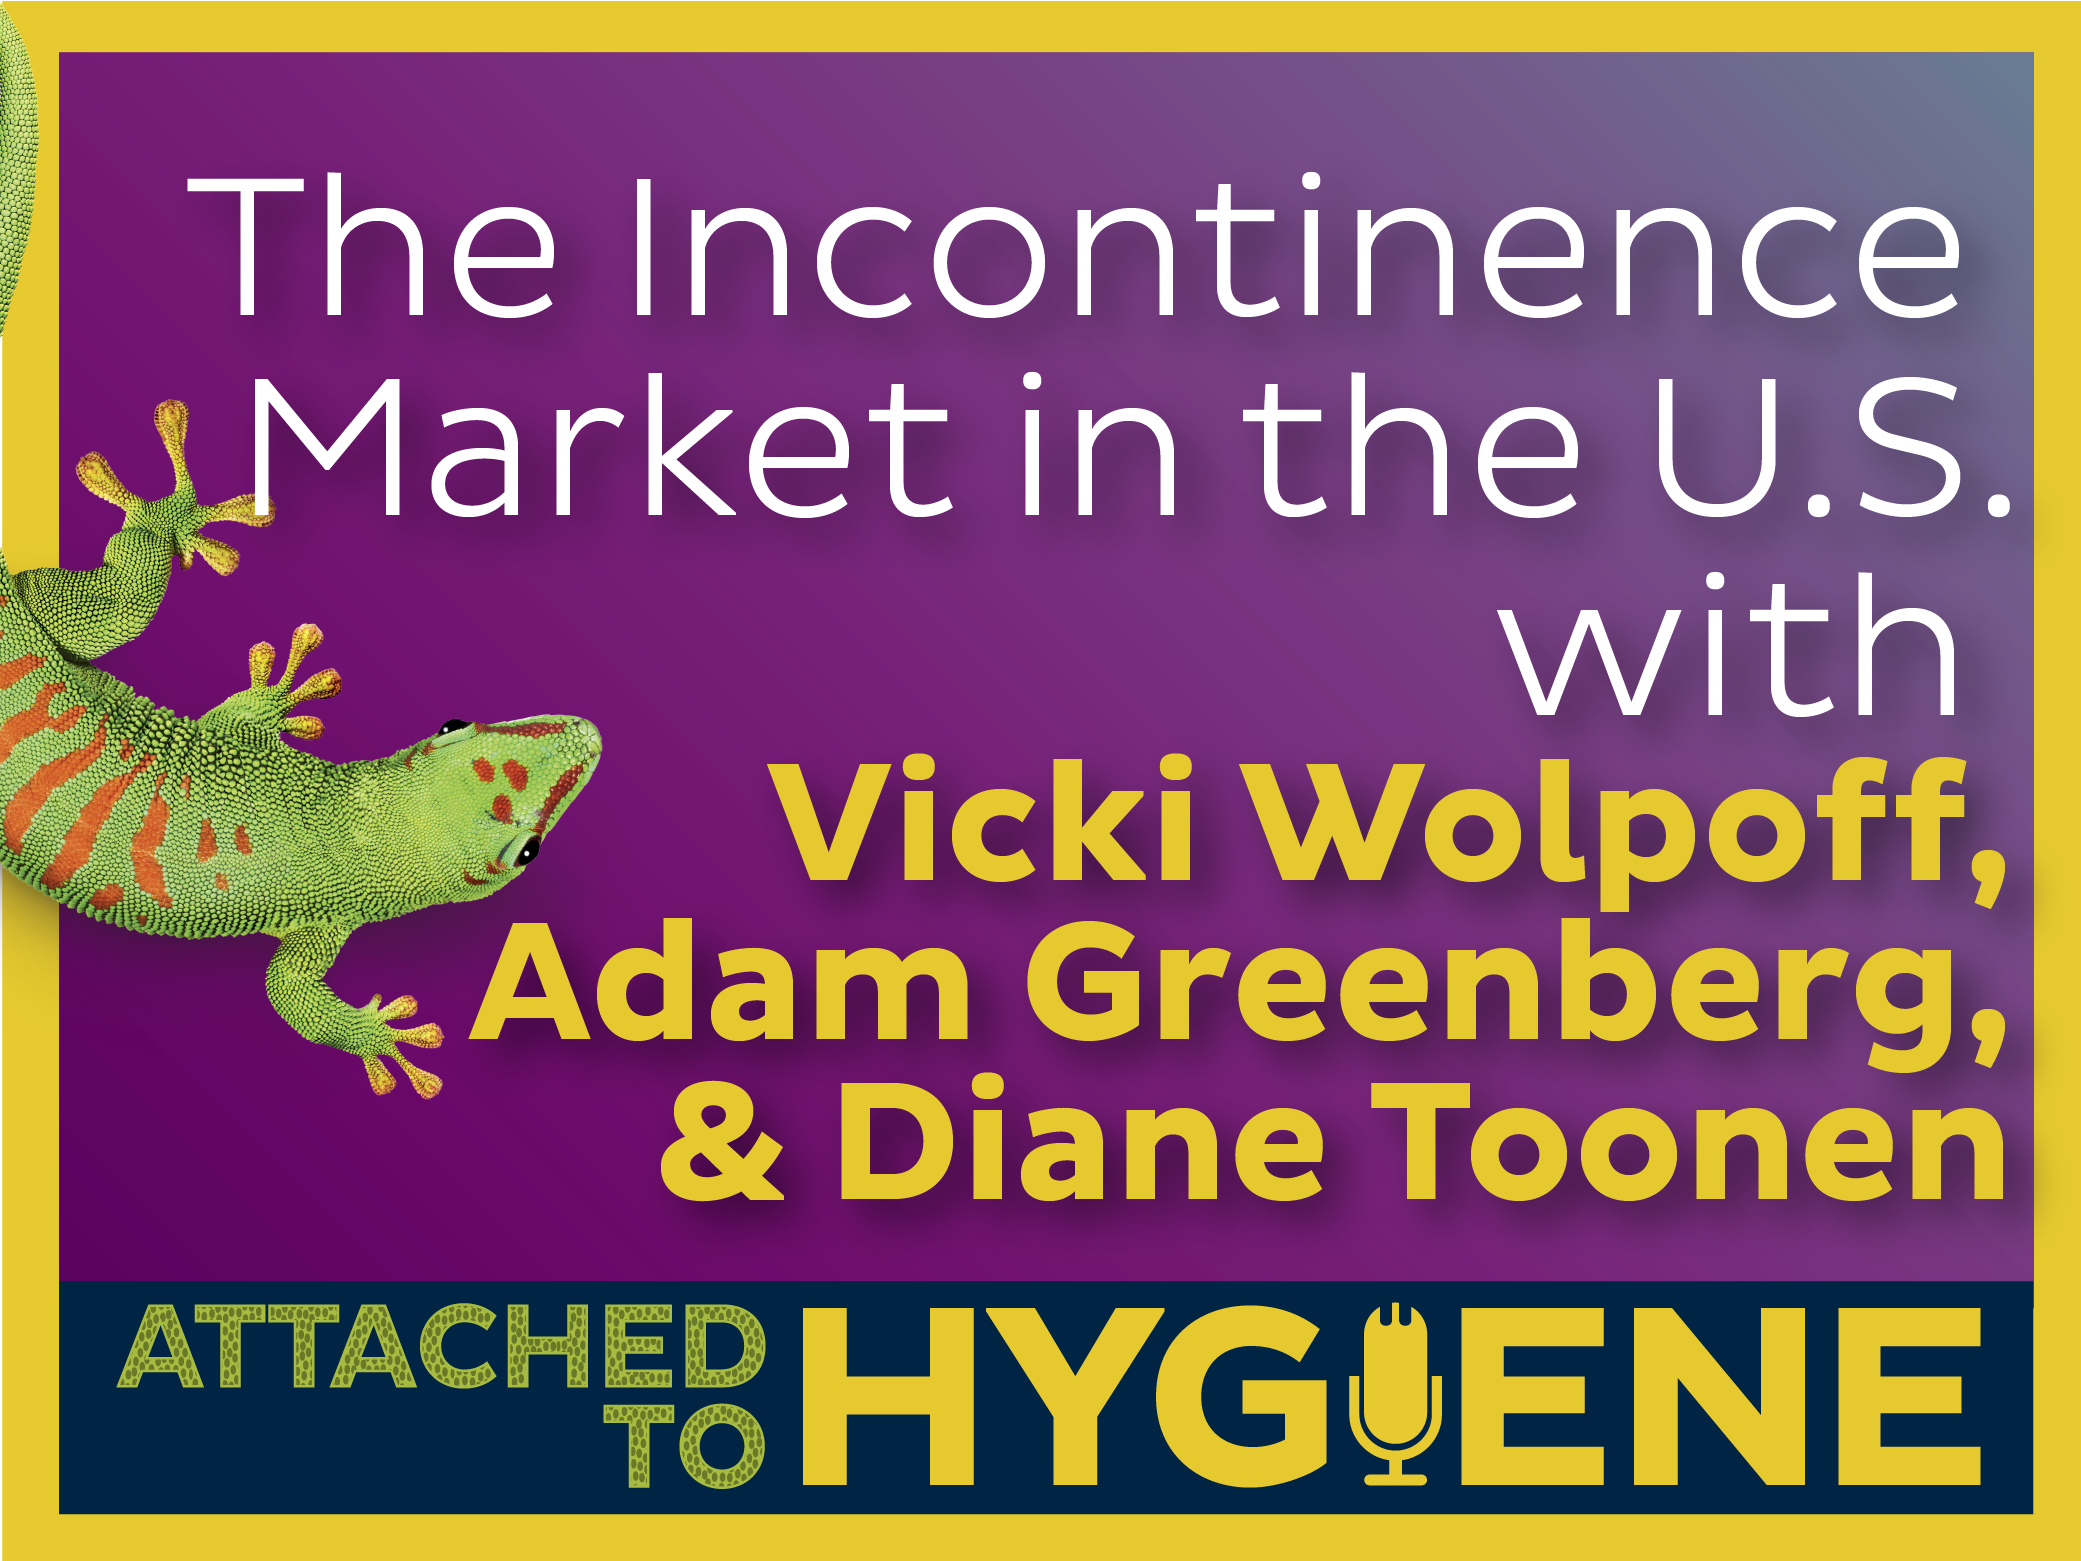 The-Incontinence-Market-in-the-US-with-Vicki-Wolpoff-Adam-Greenberg-and-Diane-Toonen